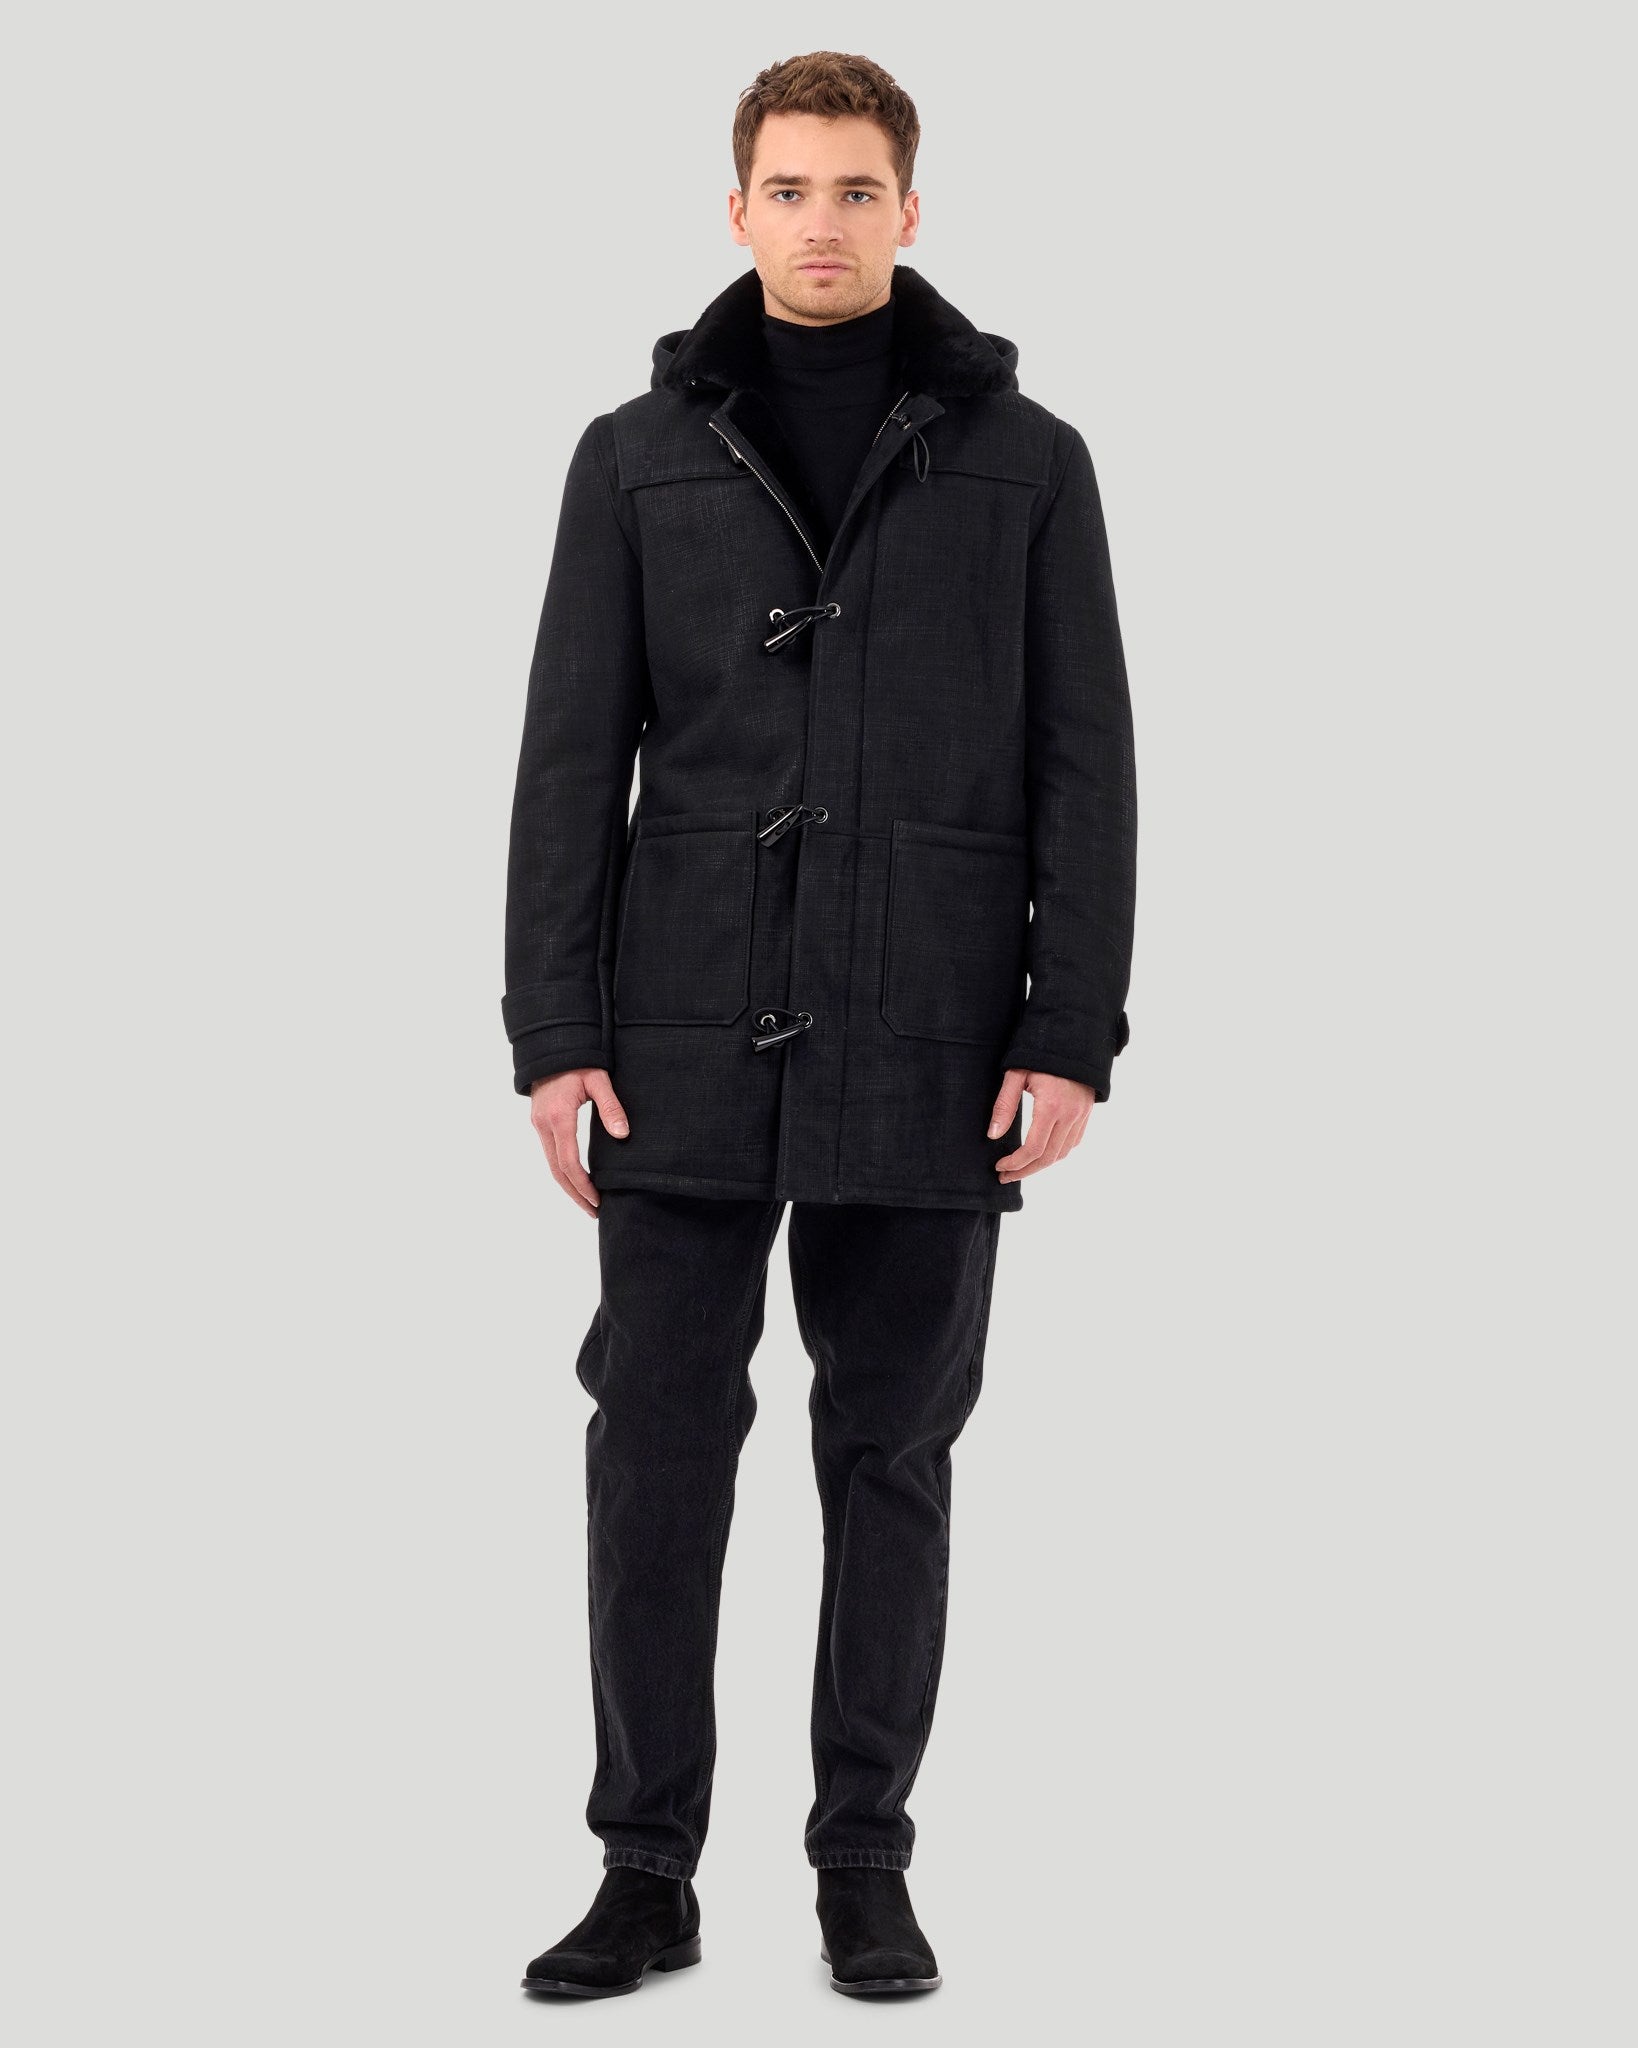 Men Outerwear Jackets & Coats Shearling Collection - Gorski